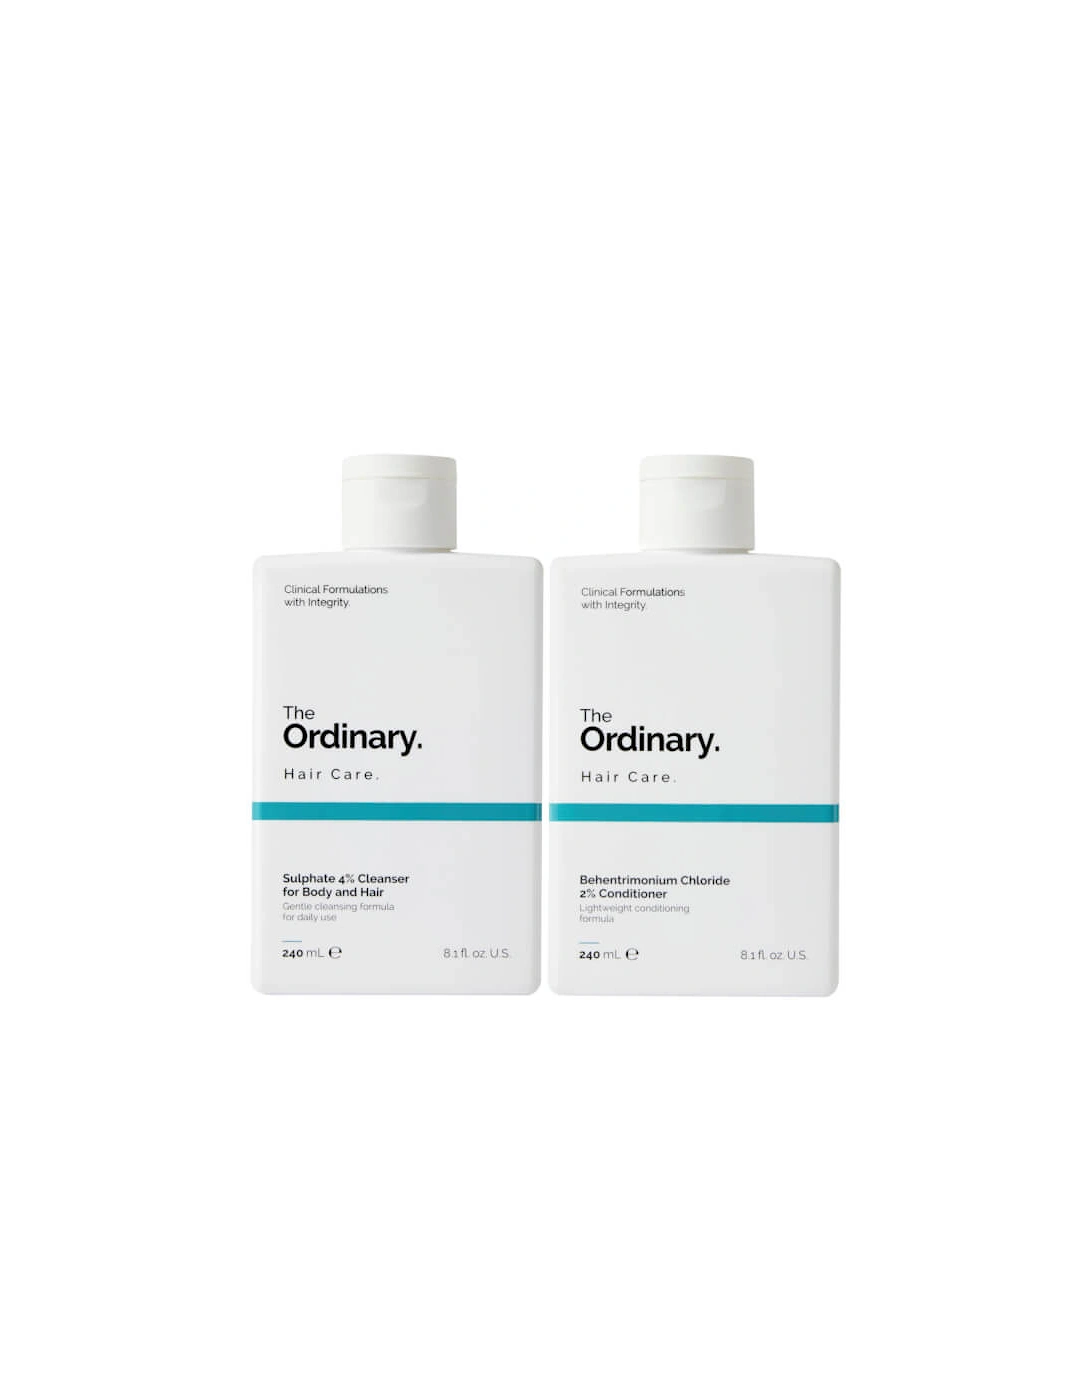 Sulphate Cleanser and Behentrimonium Chloride Conditioner Duo, 2 of 1